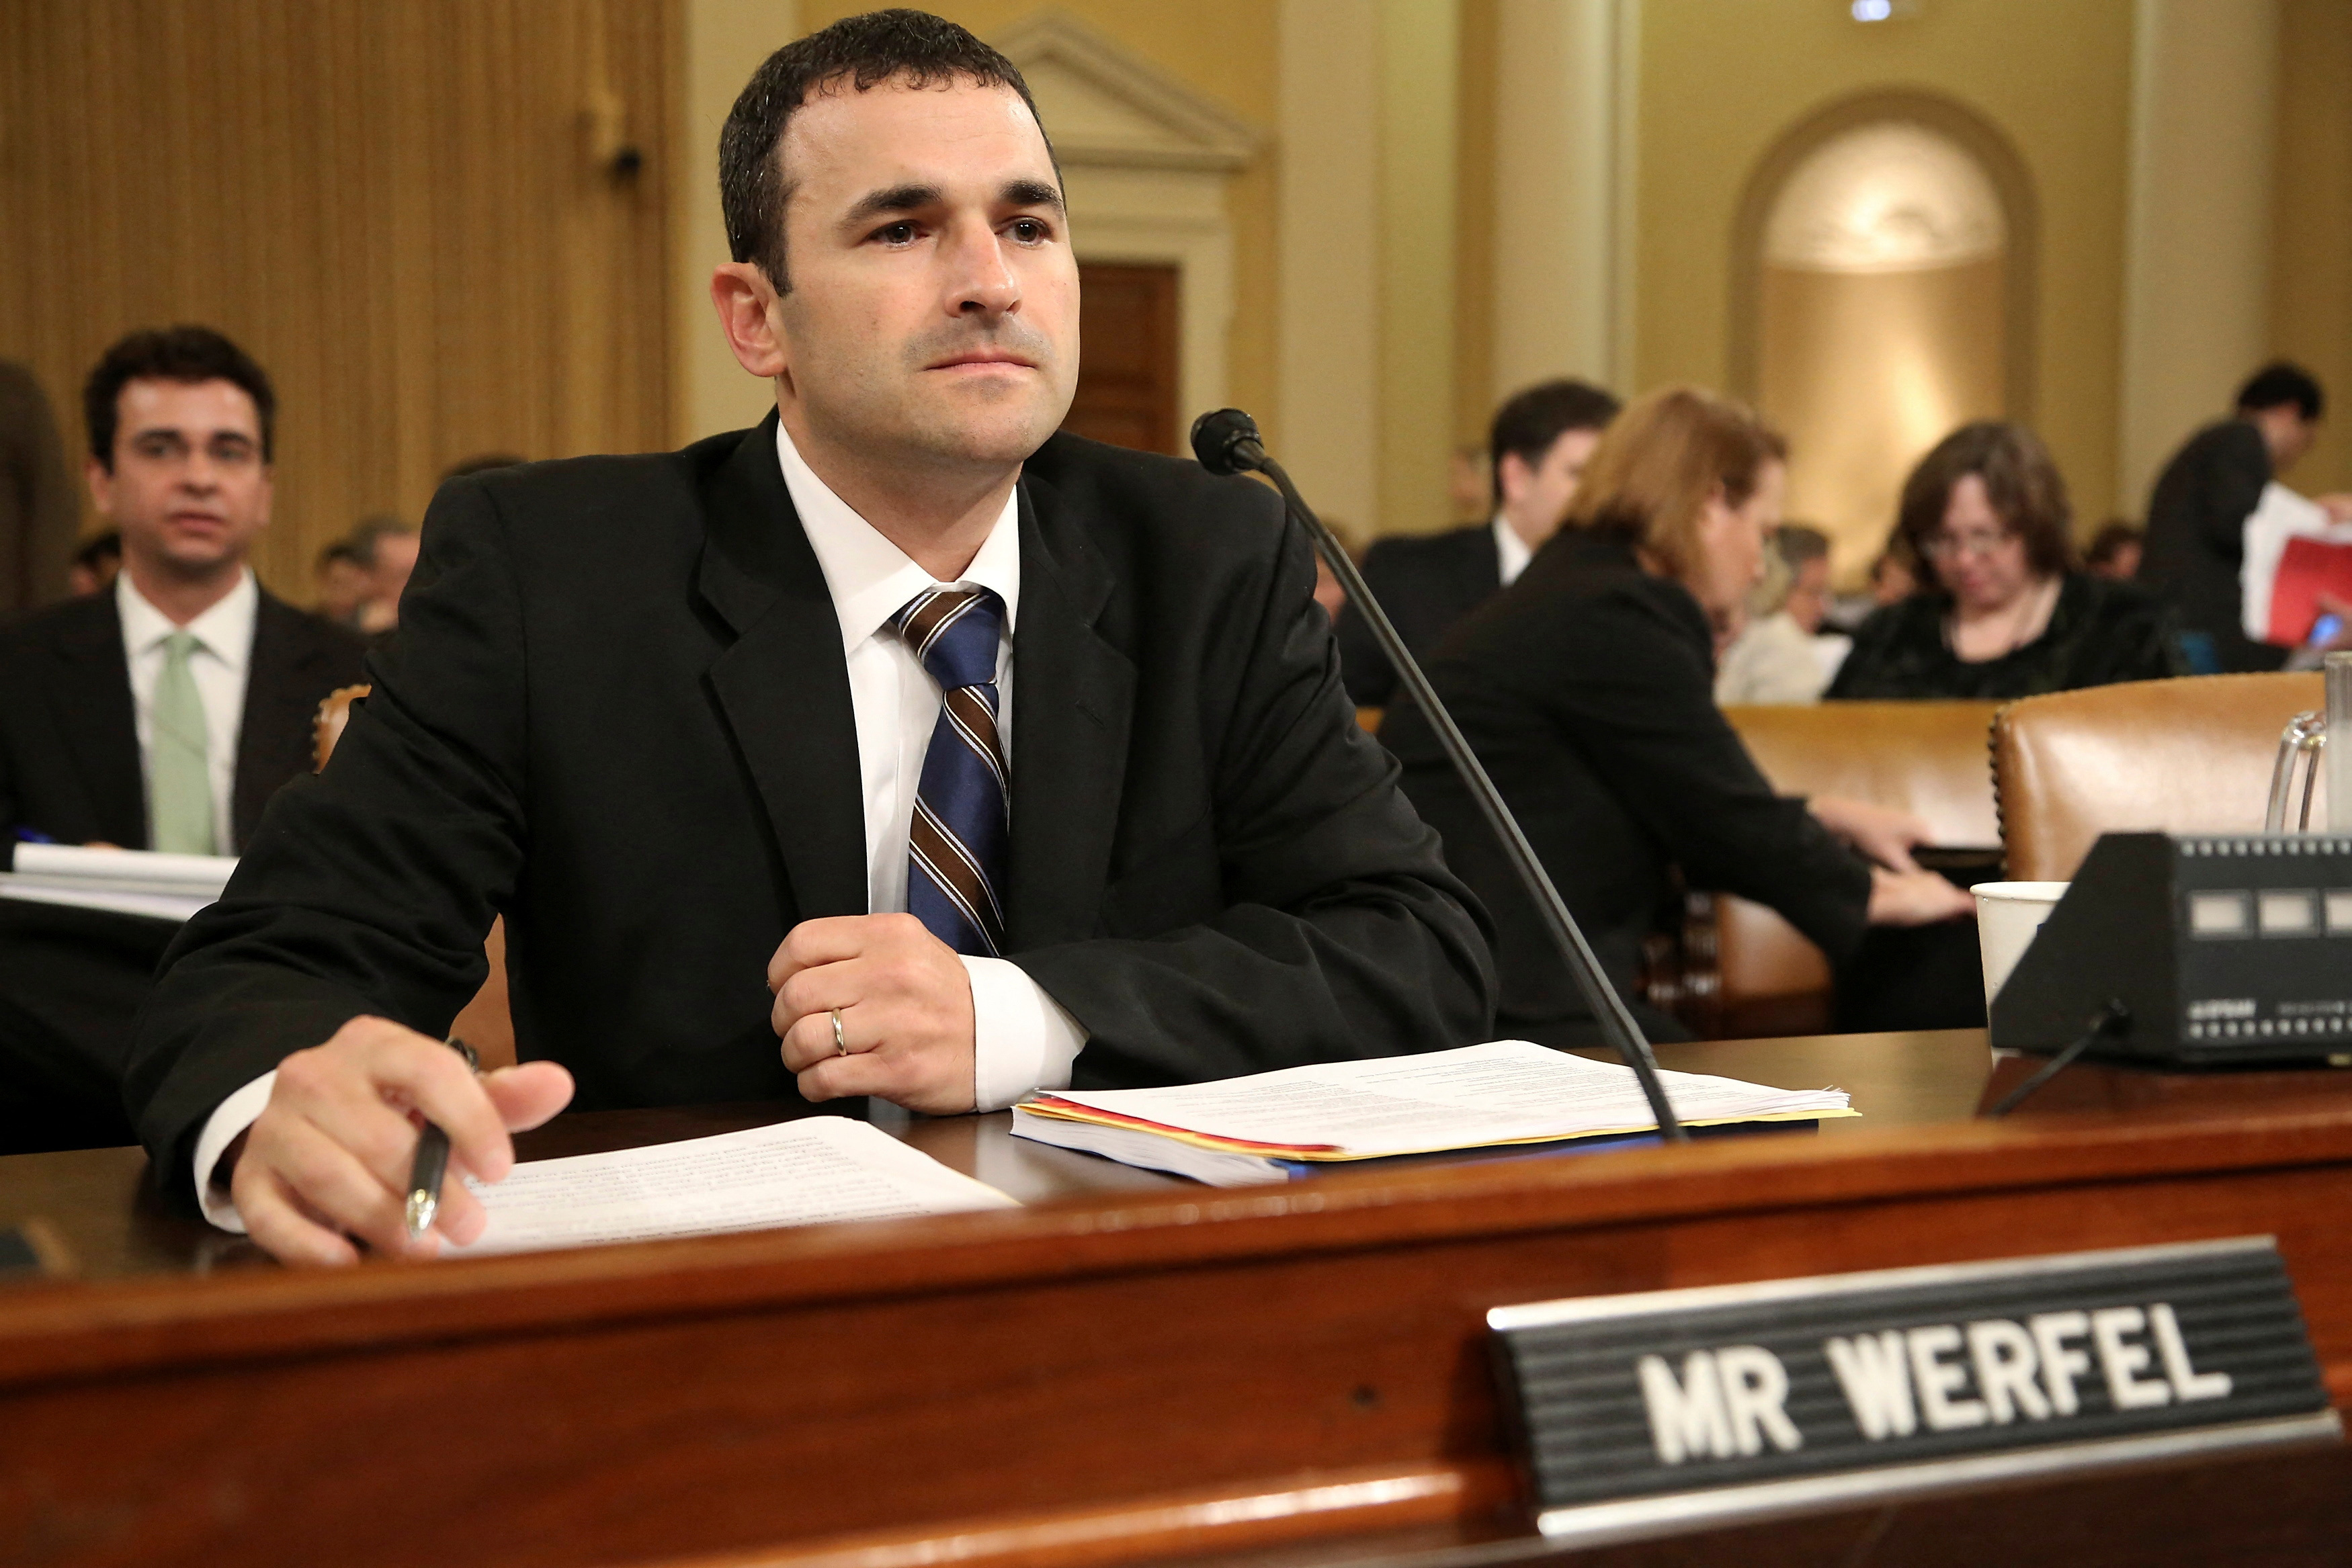 Werfel takes his seat to testify before a House Ways and Means Committee hearing on the status of the IRS's targeting of political groups, on Capitol Hill in Washington